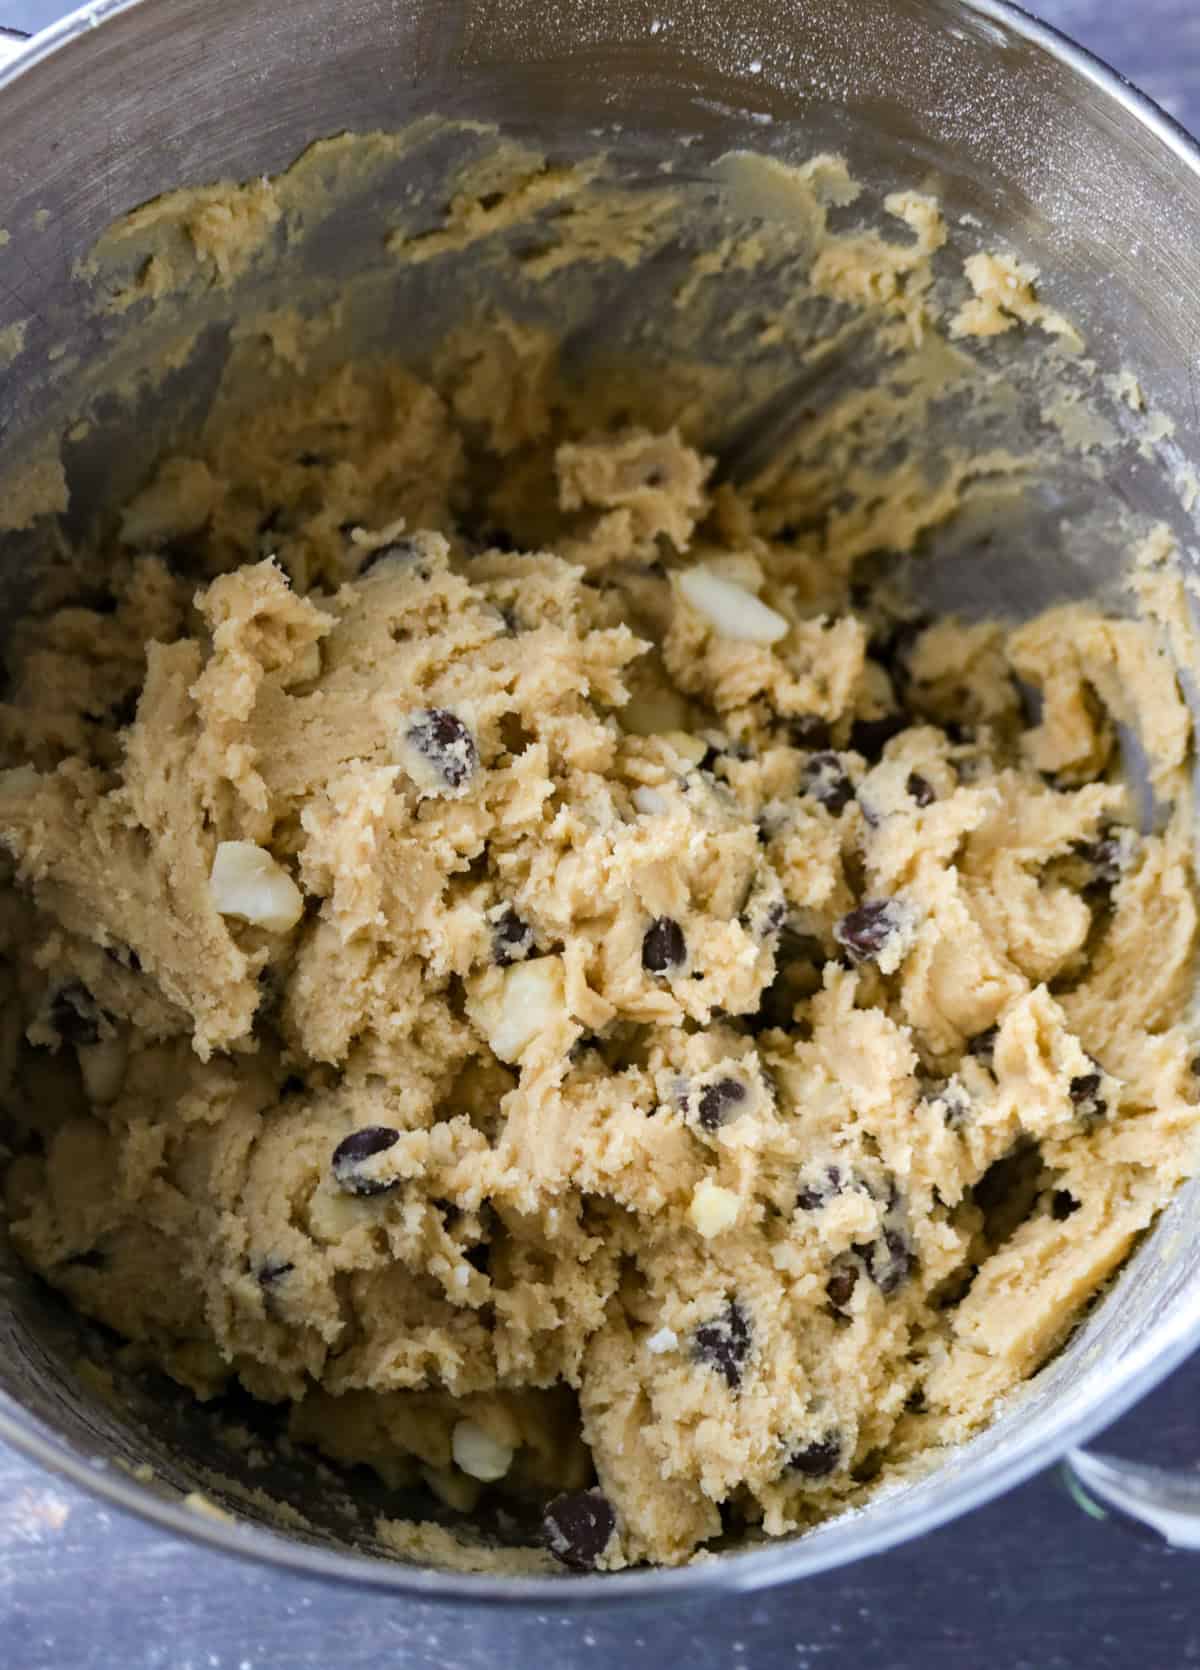 The cookie dough in a mixing bowl ready for chilling.